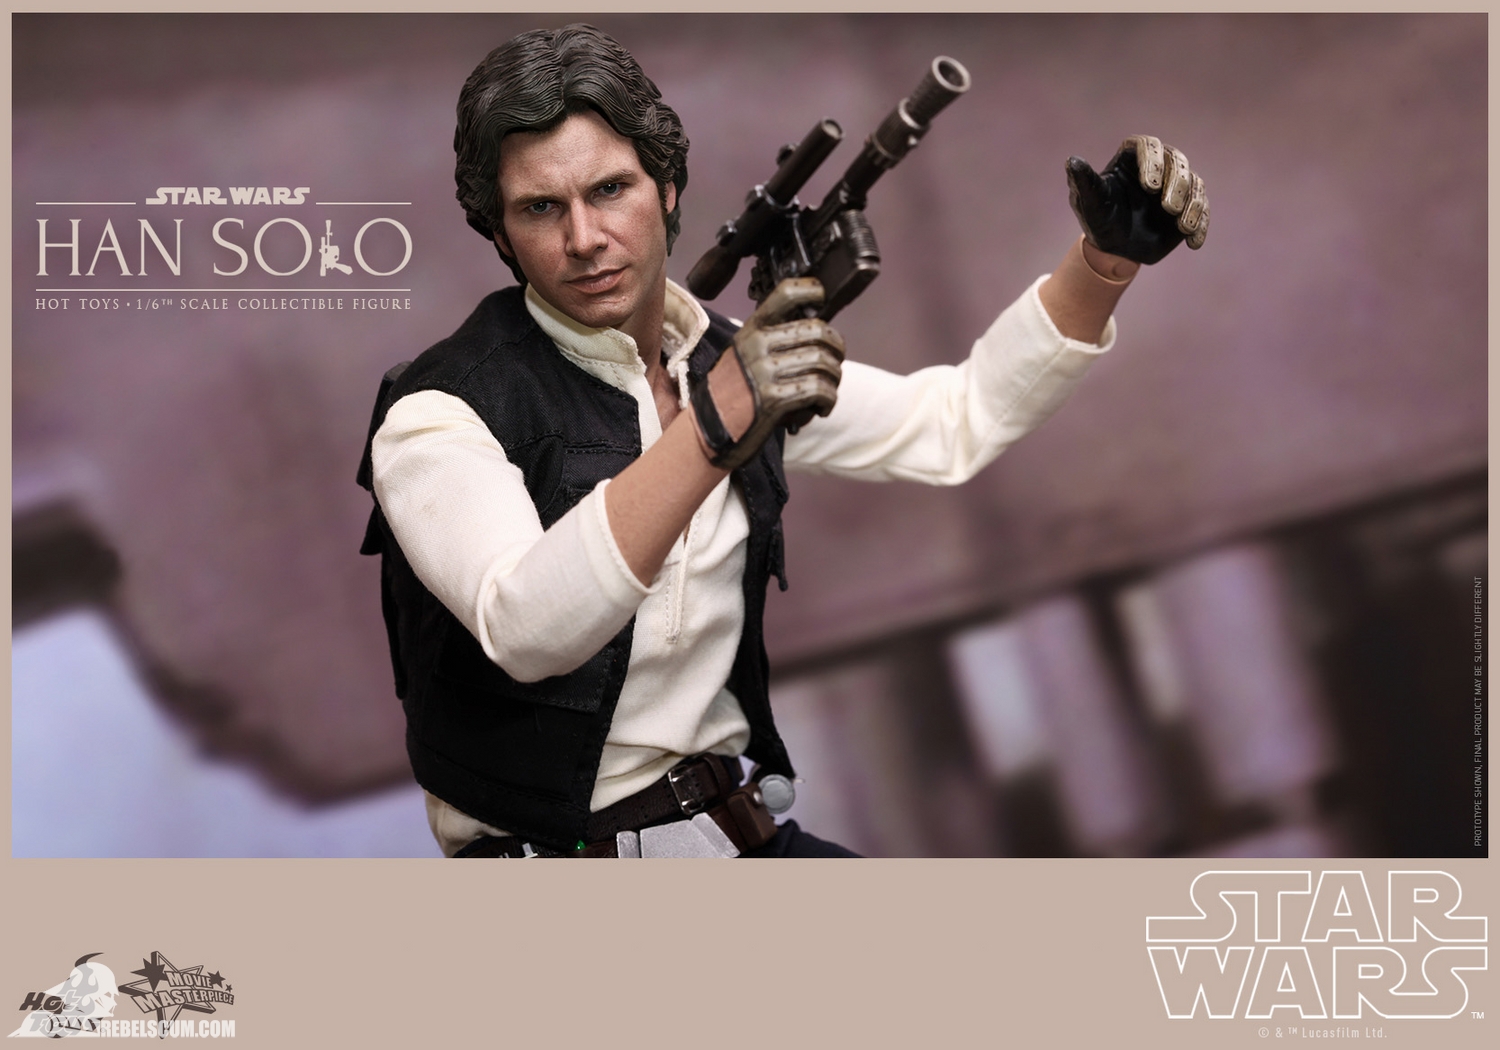 Hot-Toys-A-New-Hope-Han-solo-Movie-Masterpiece-Series-010.jpg